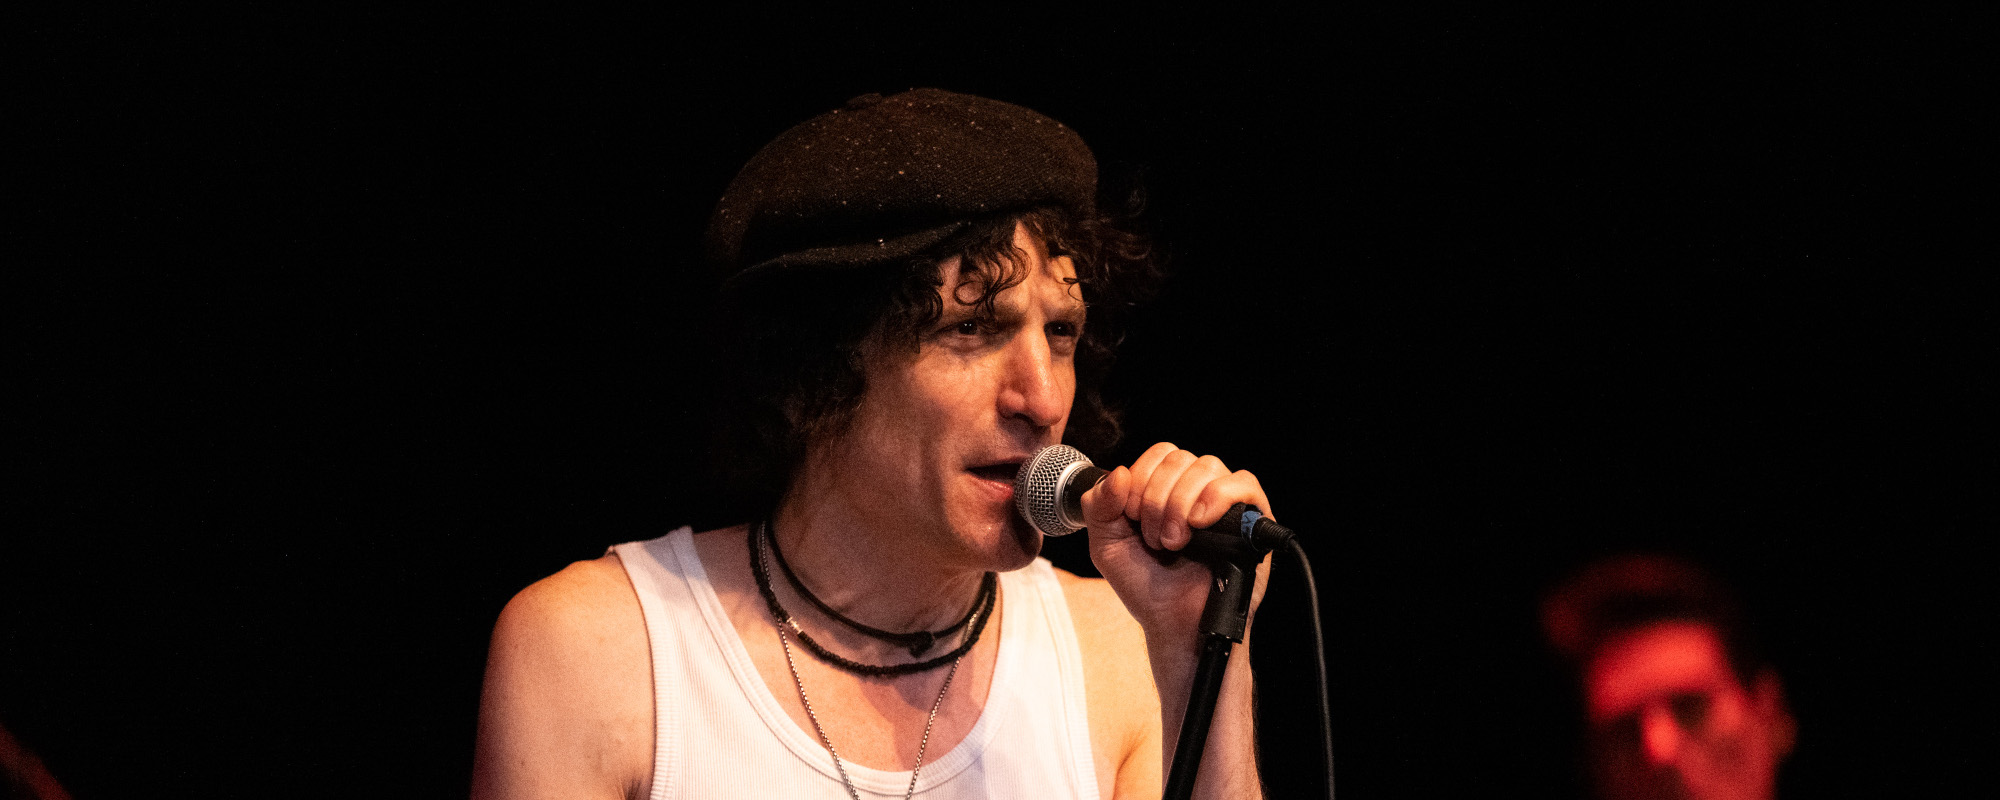 Jesse Malins reveals he is paralysed from the waist down after